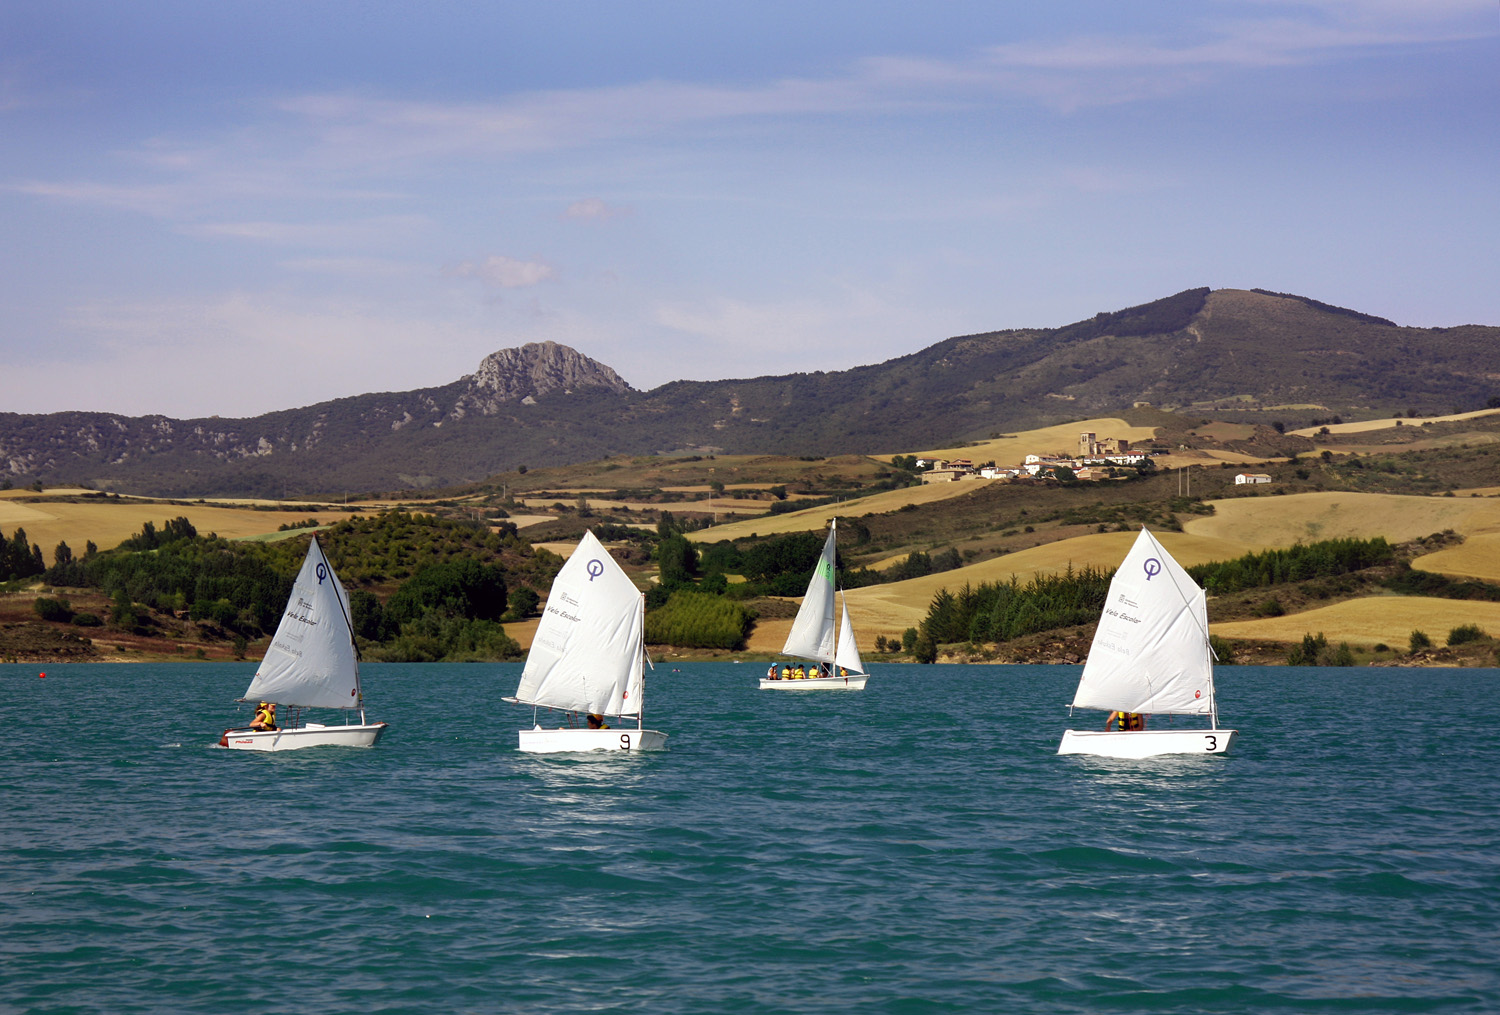 Sailing boats in the Alloz swamp